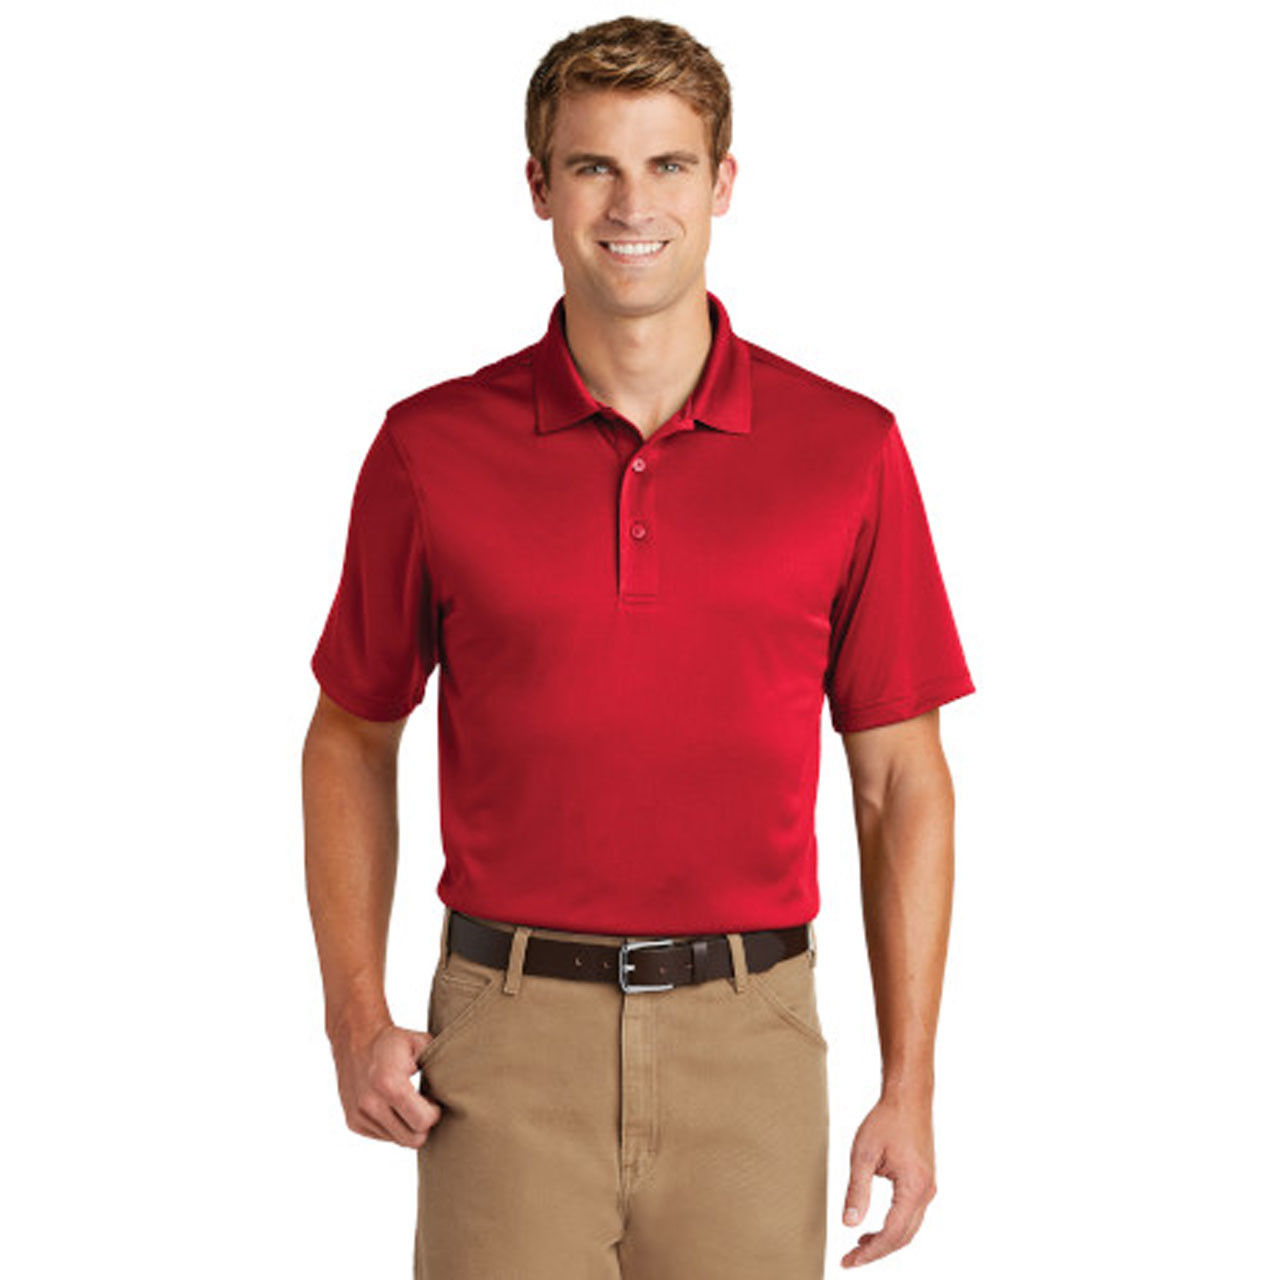 Wholesale Men's Snag-Proof Polo Shirt- Red CS412, Case of 36 Questions & Answers